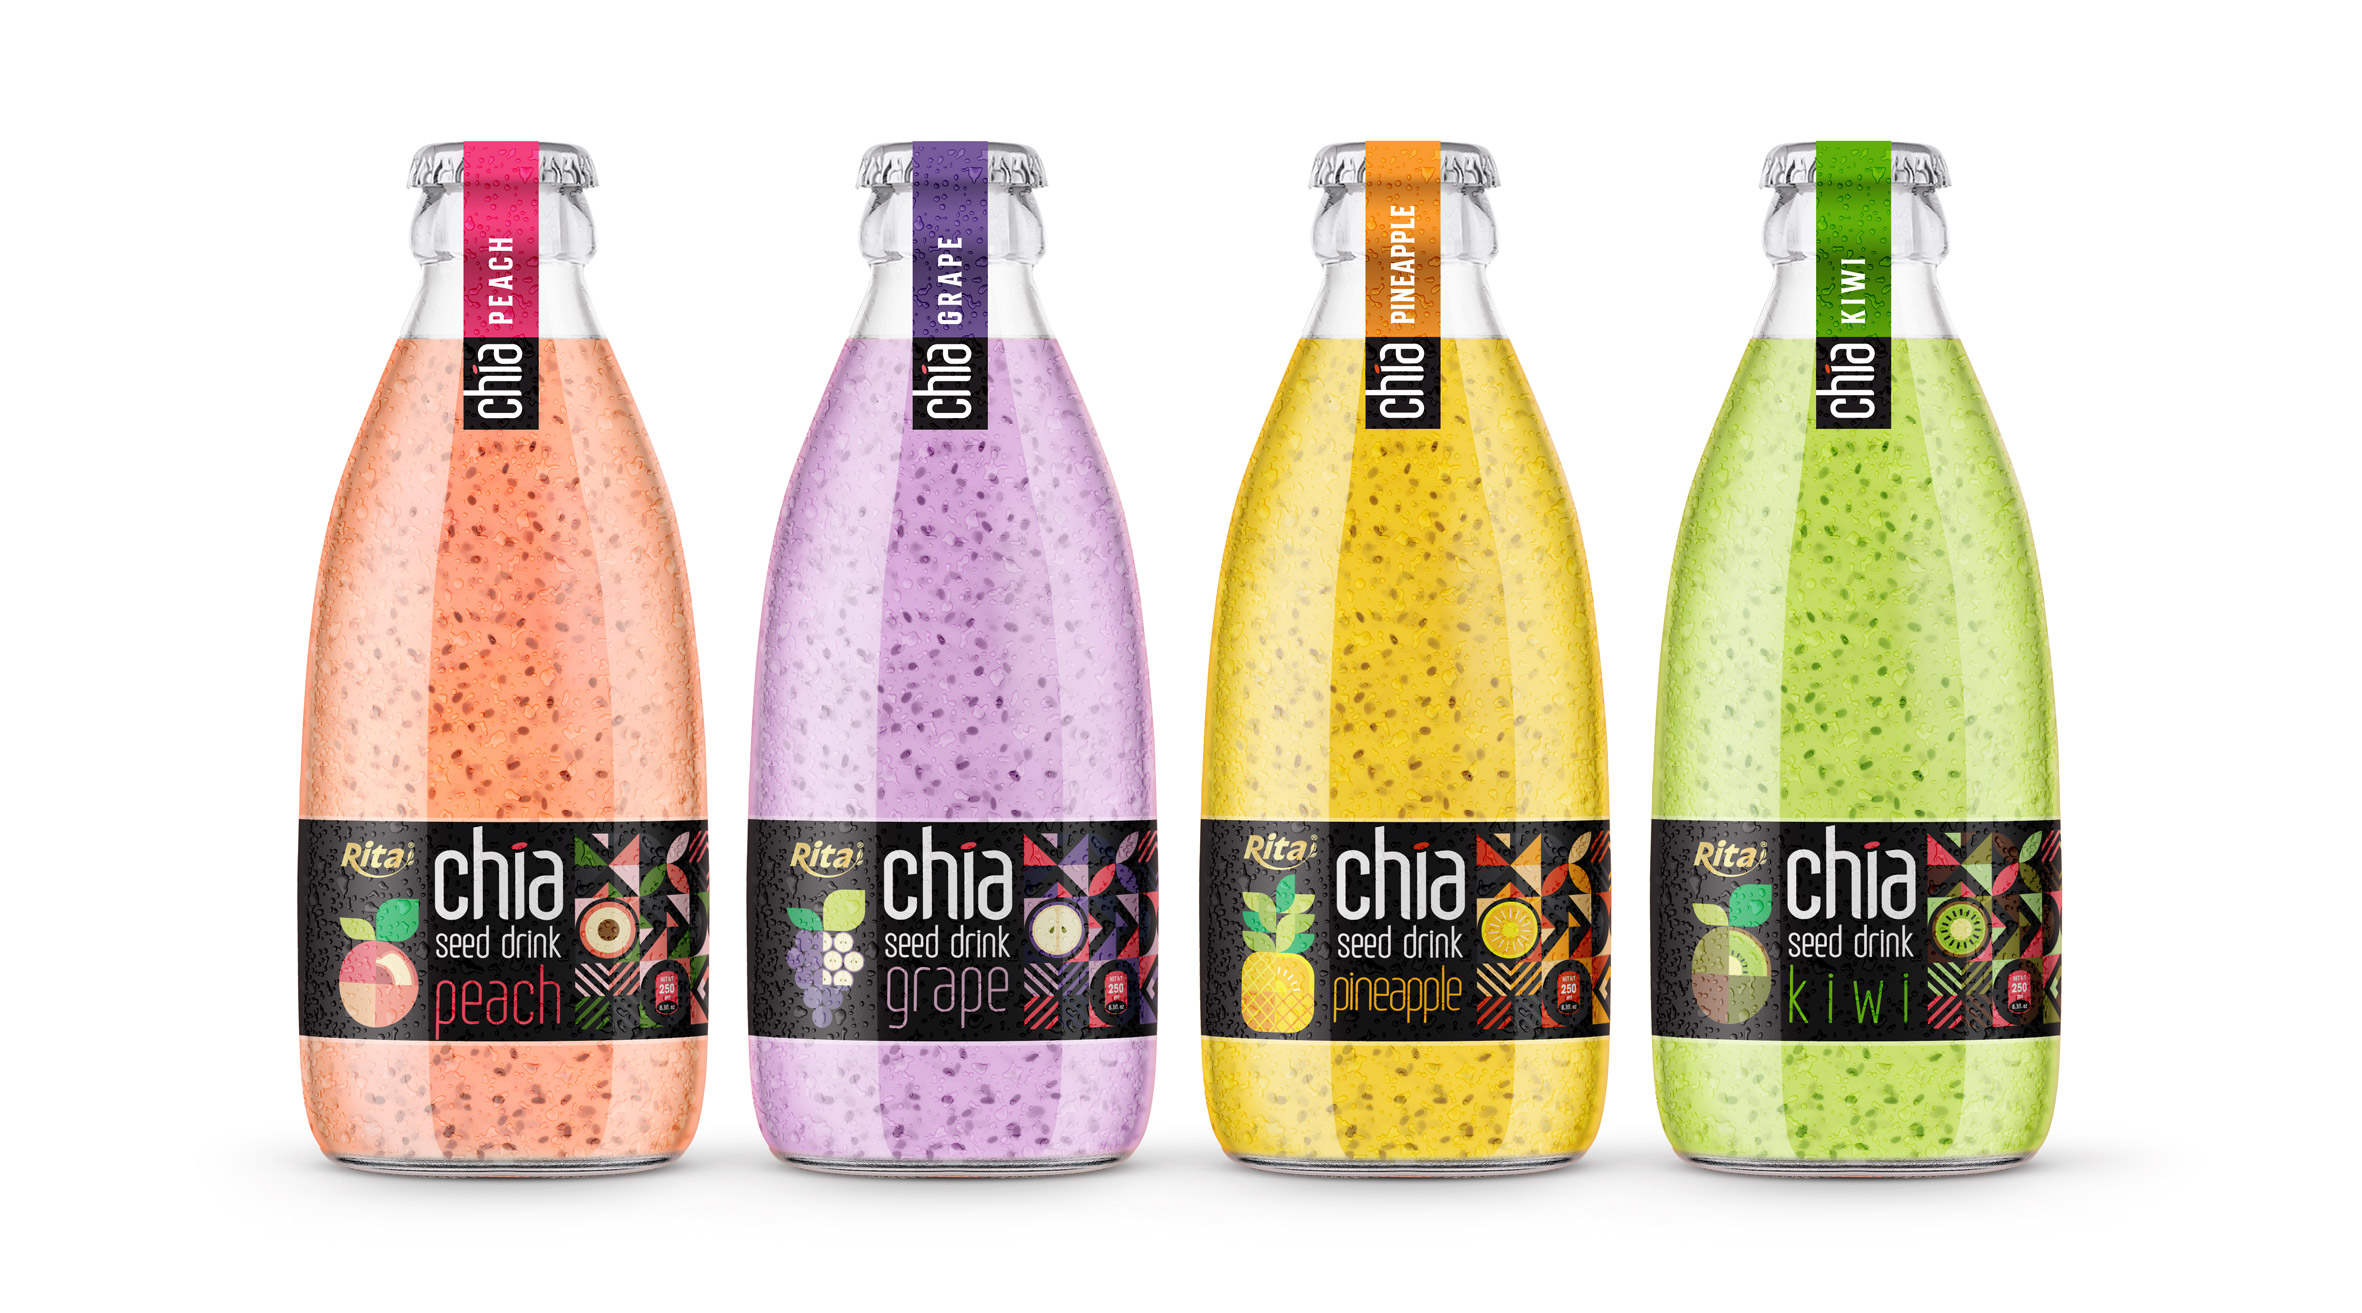 Best Chia seed drink export company own brand